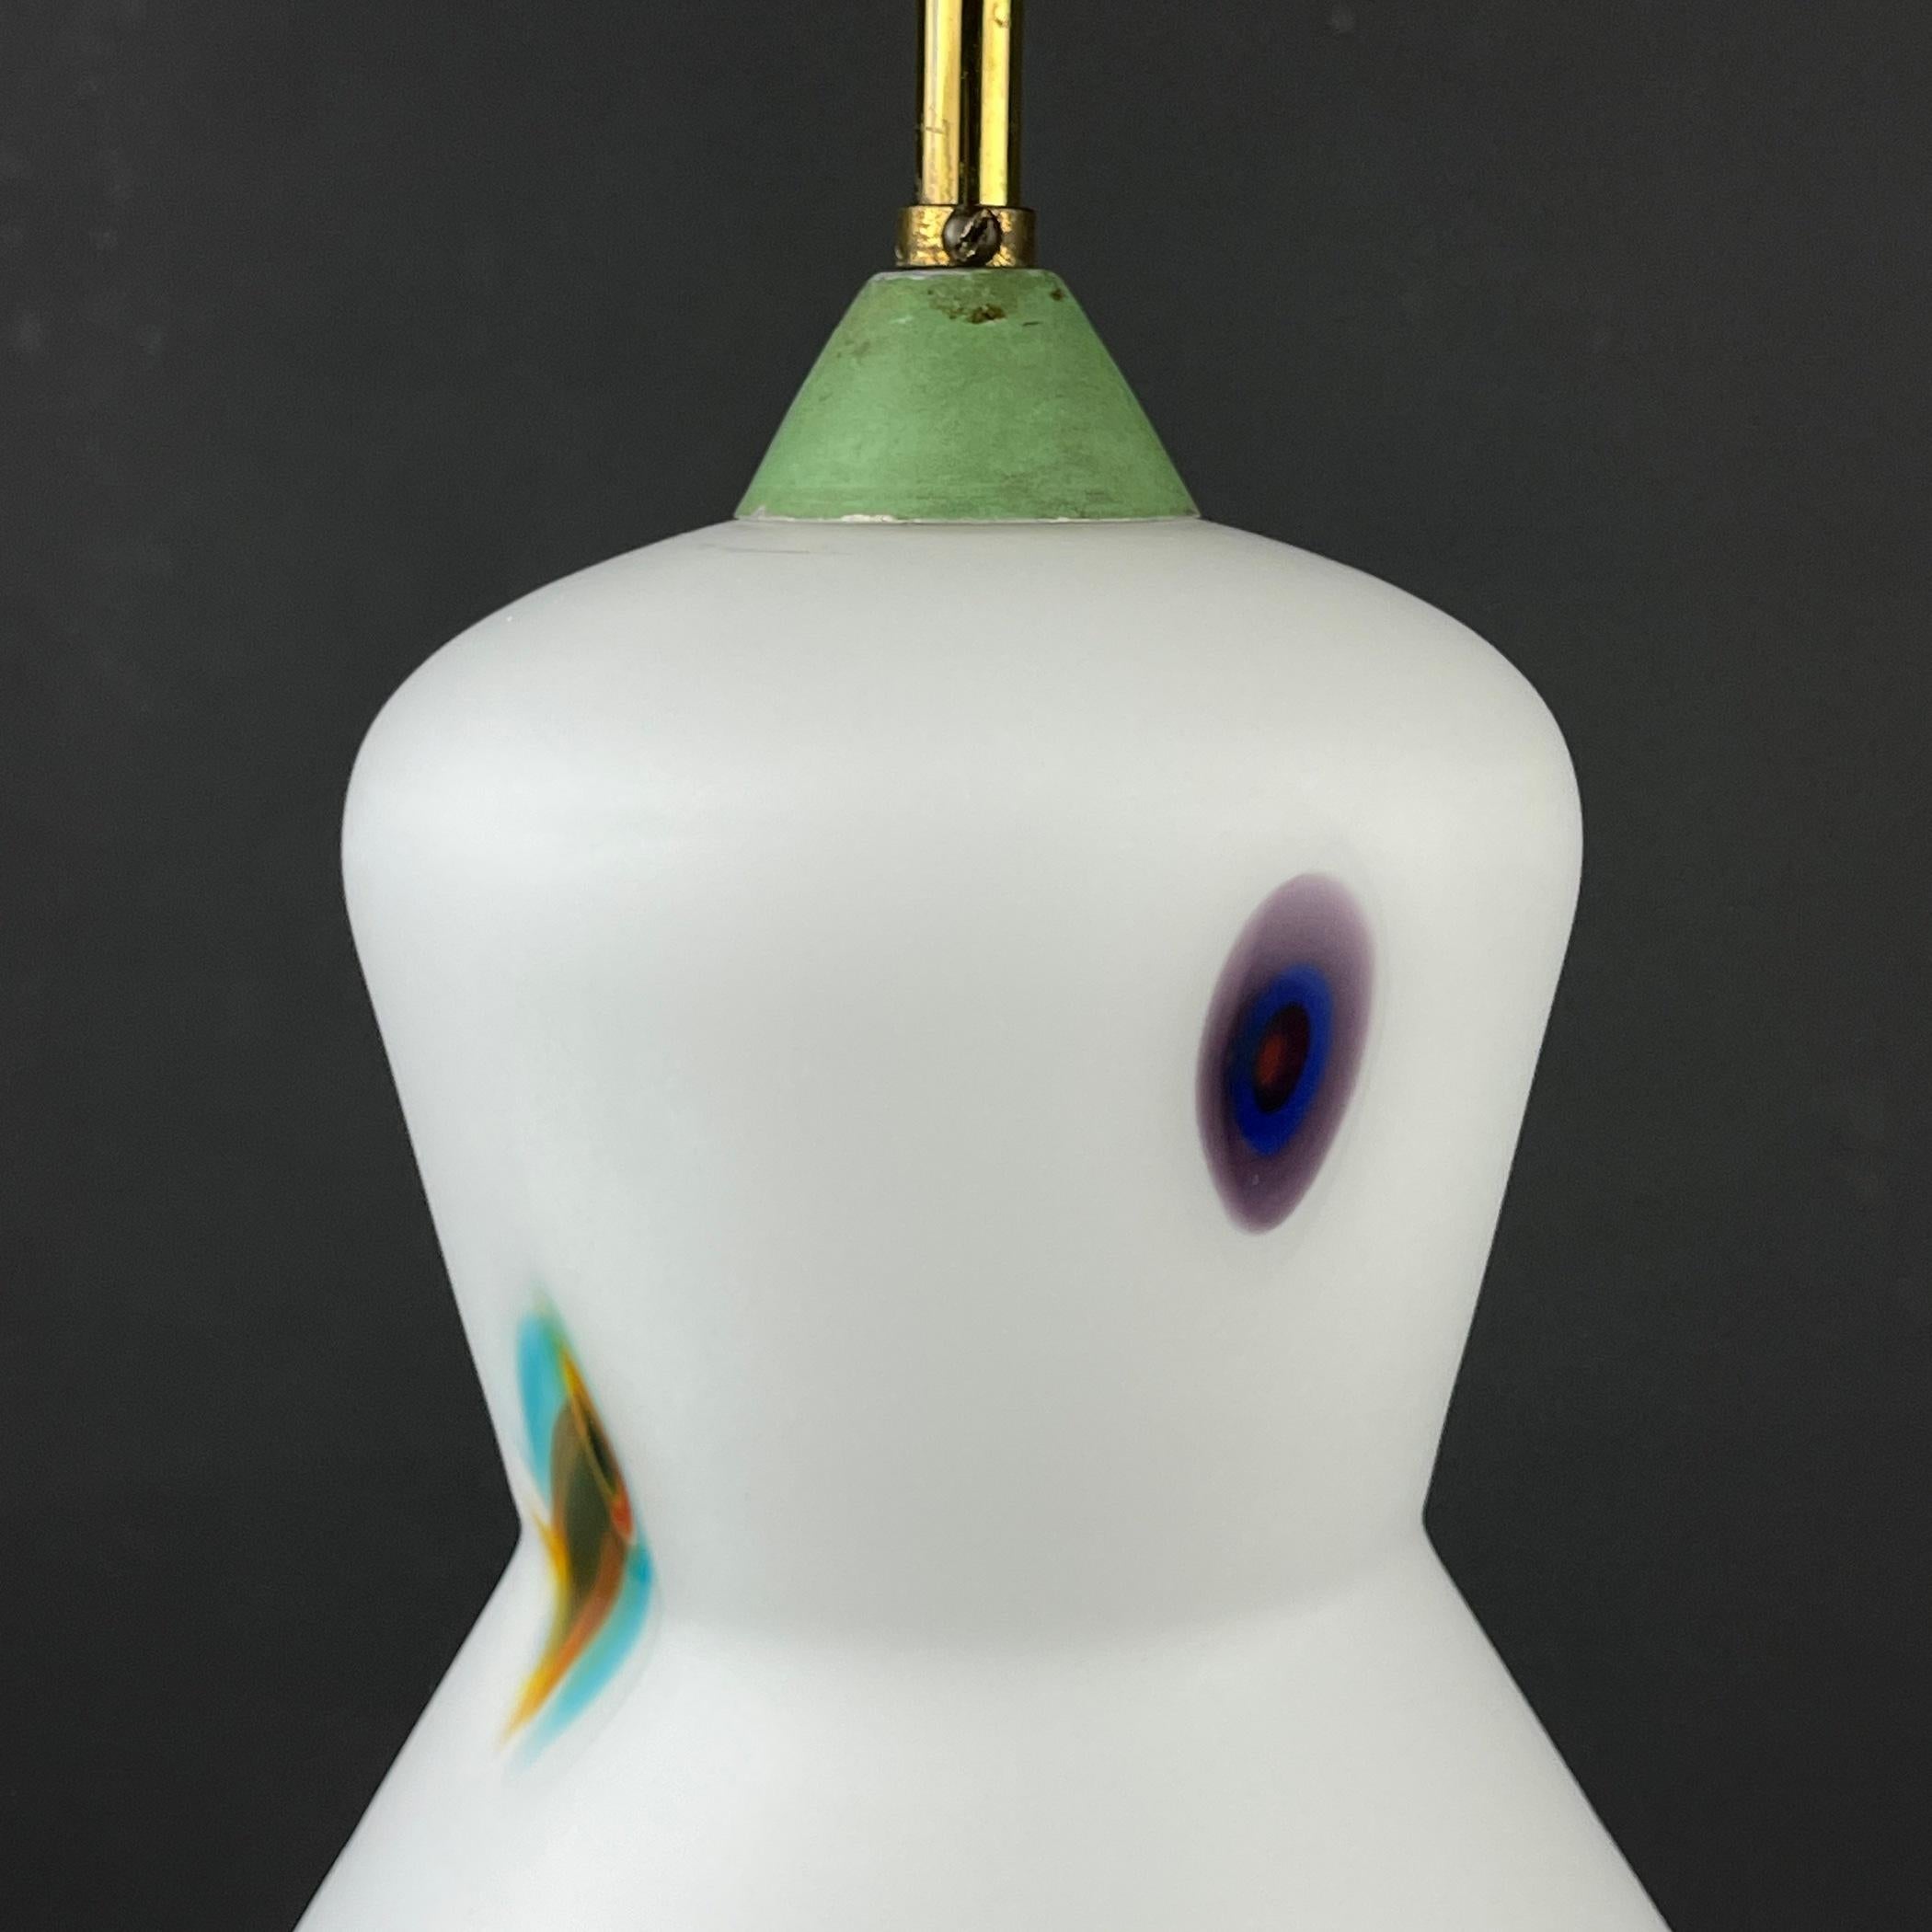 20th Century Midcentury Multicolor Opaline Murano Glass Pendant Lamp by Stilnovo Italy 1950s For Sale